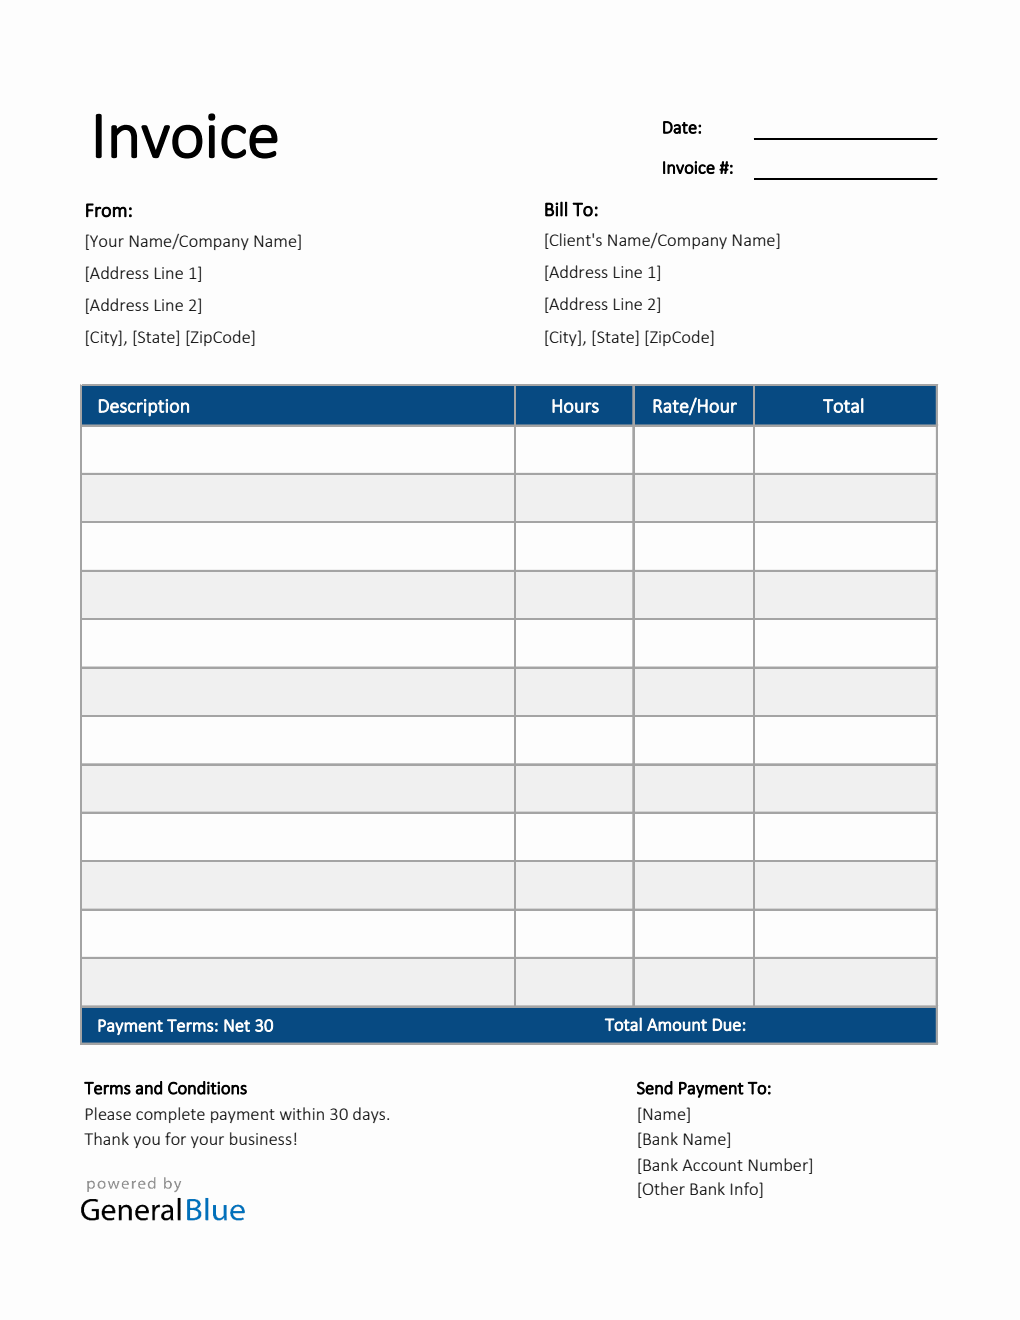 Freelance Hourly Invoice Template in Excel (Striped)